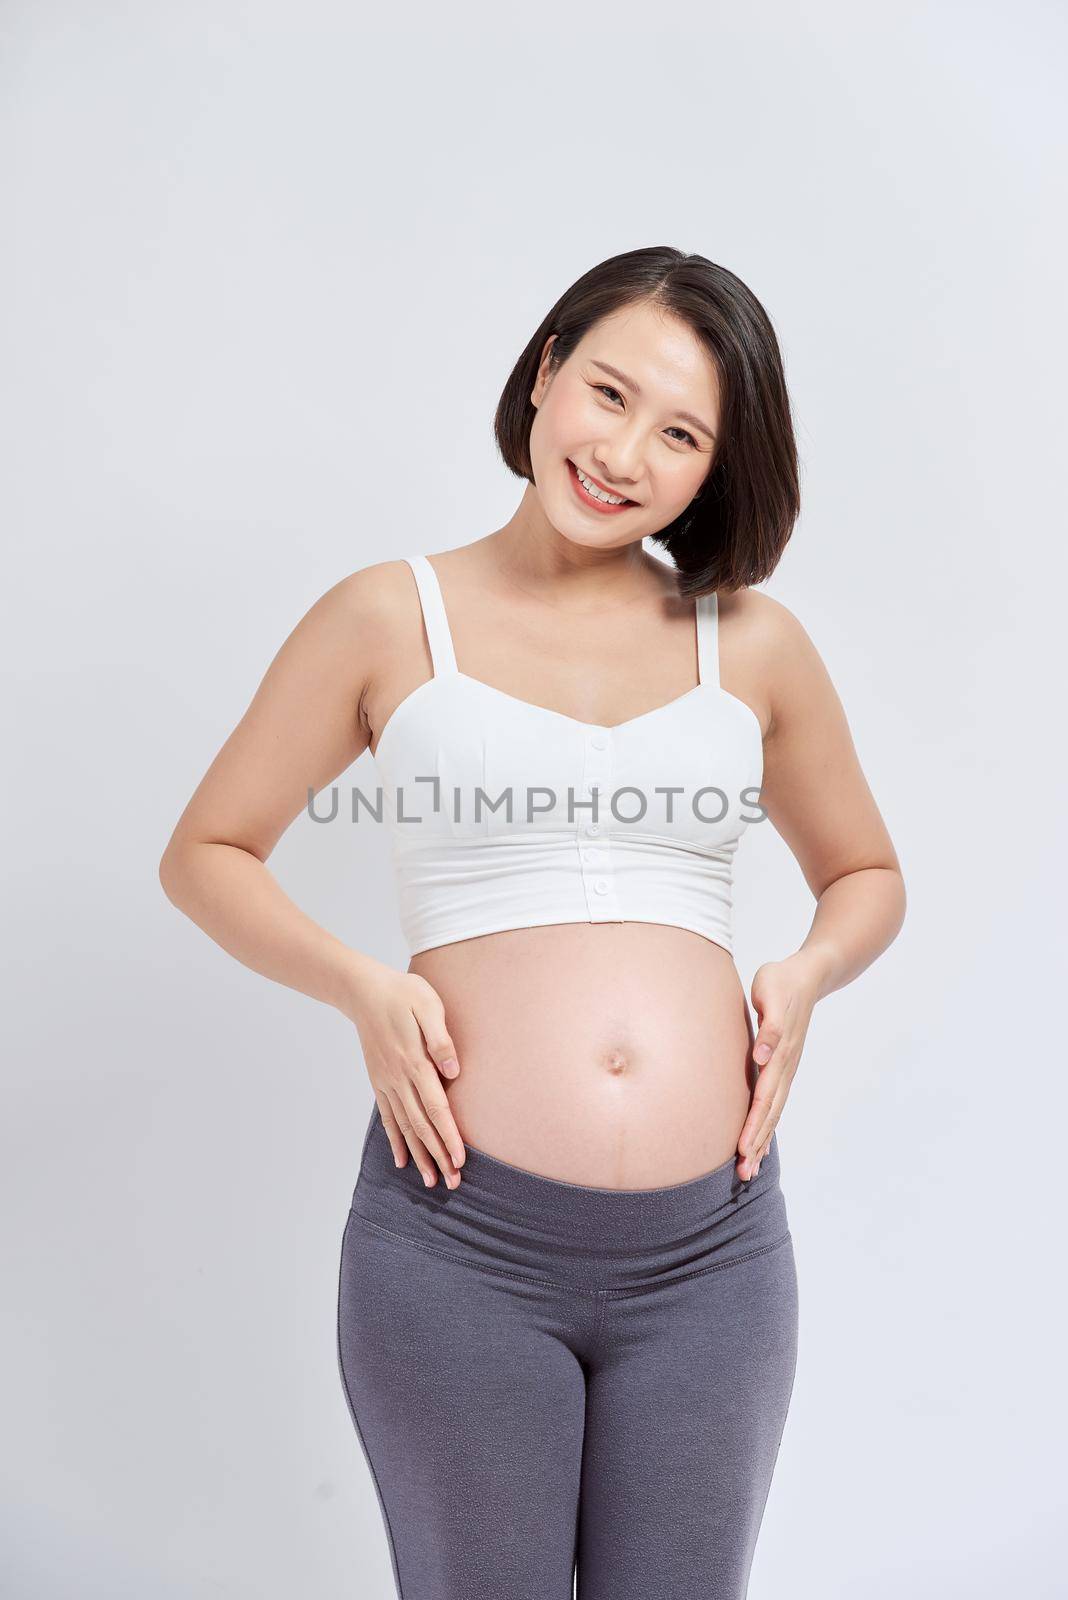 Pregnant women are watching the stomach grow happily.